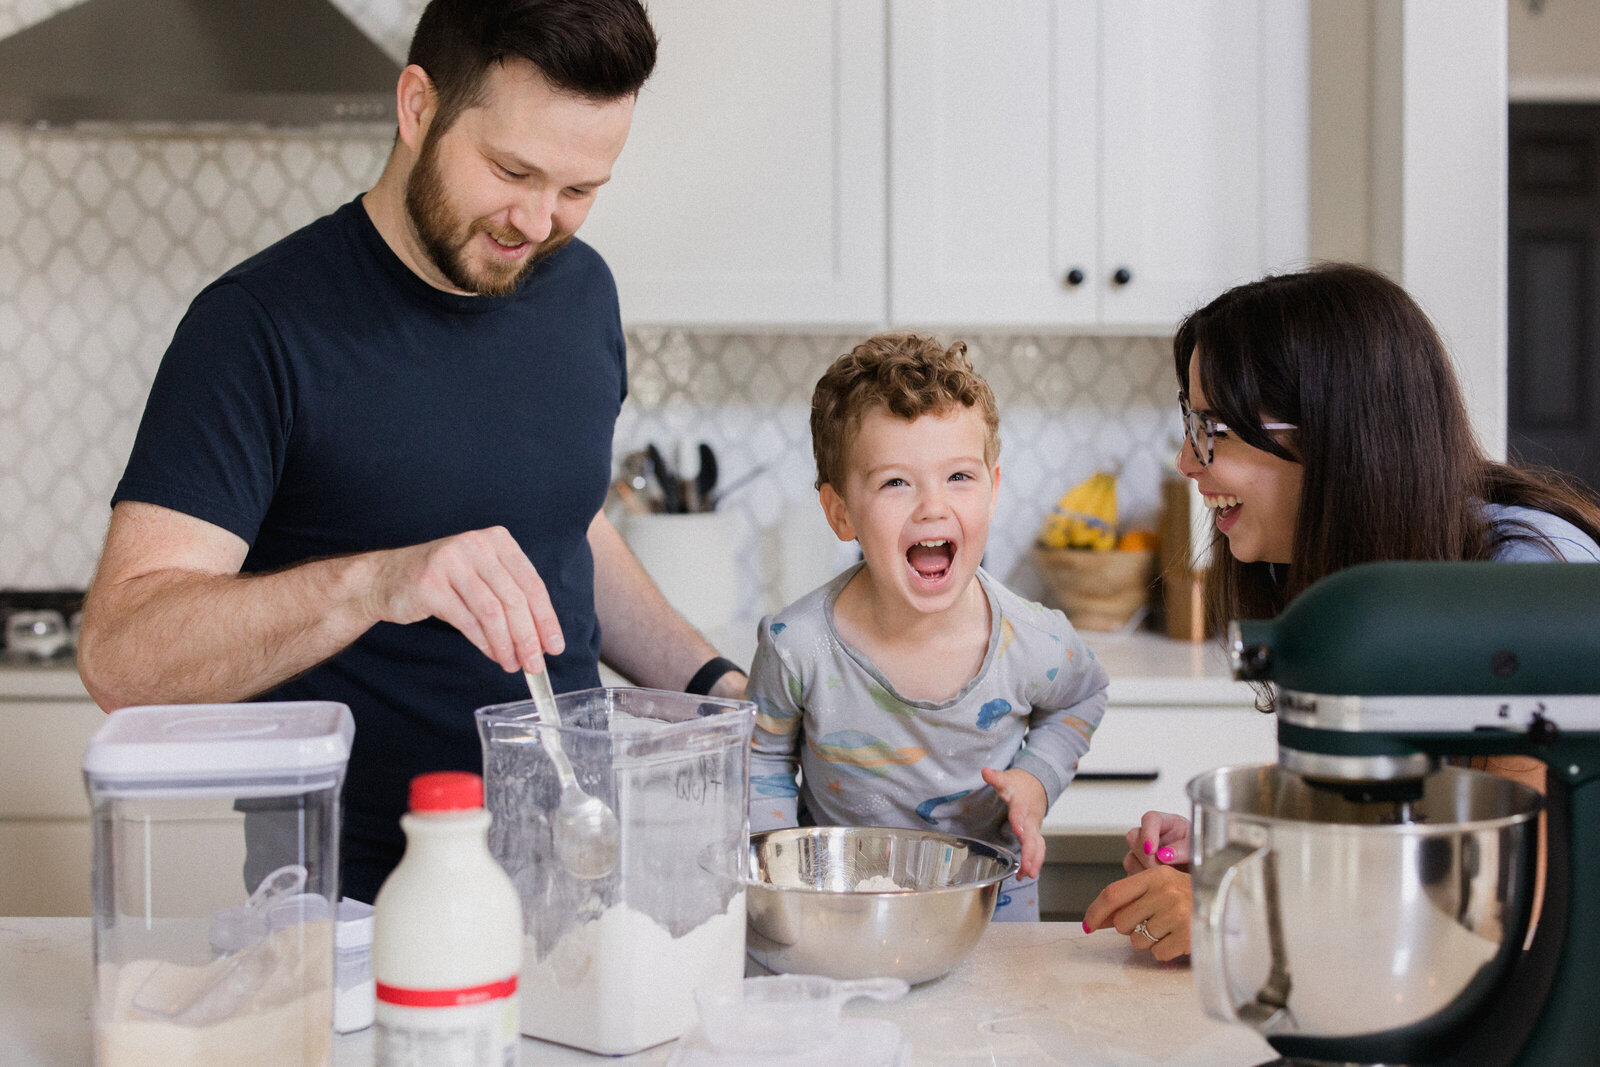 Little boy laughs with parents while mixing muffin mix in kitchen